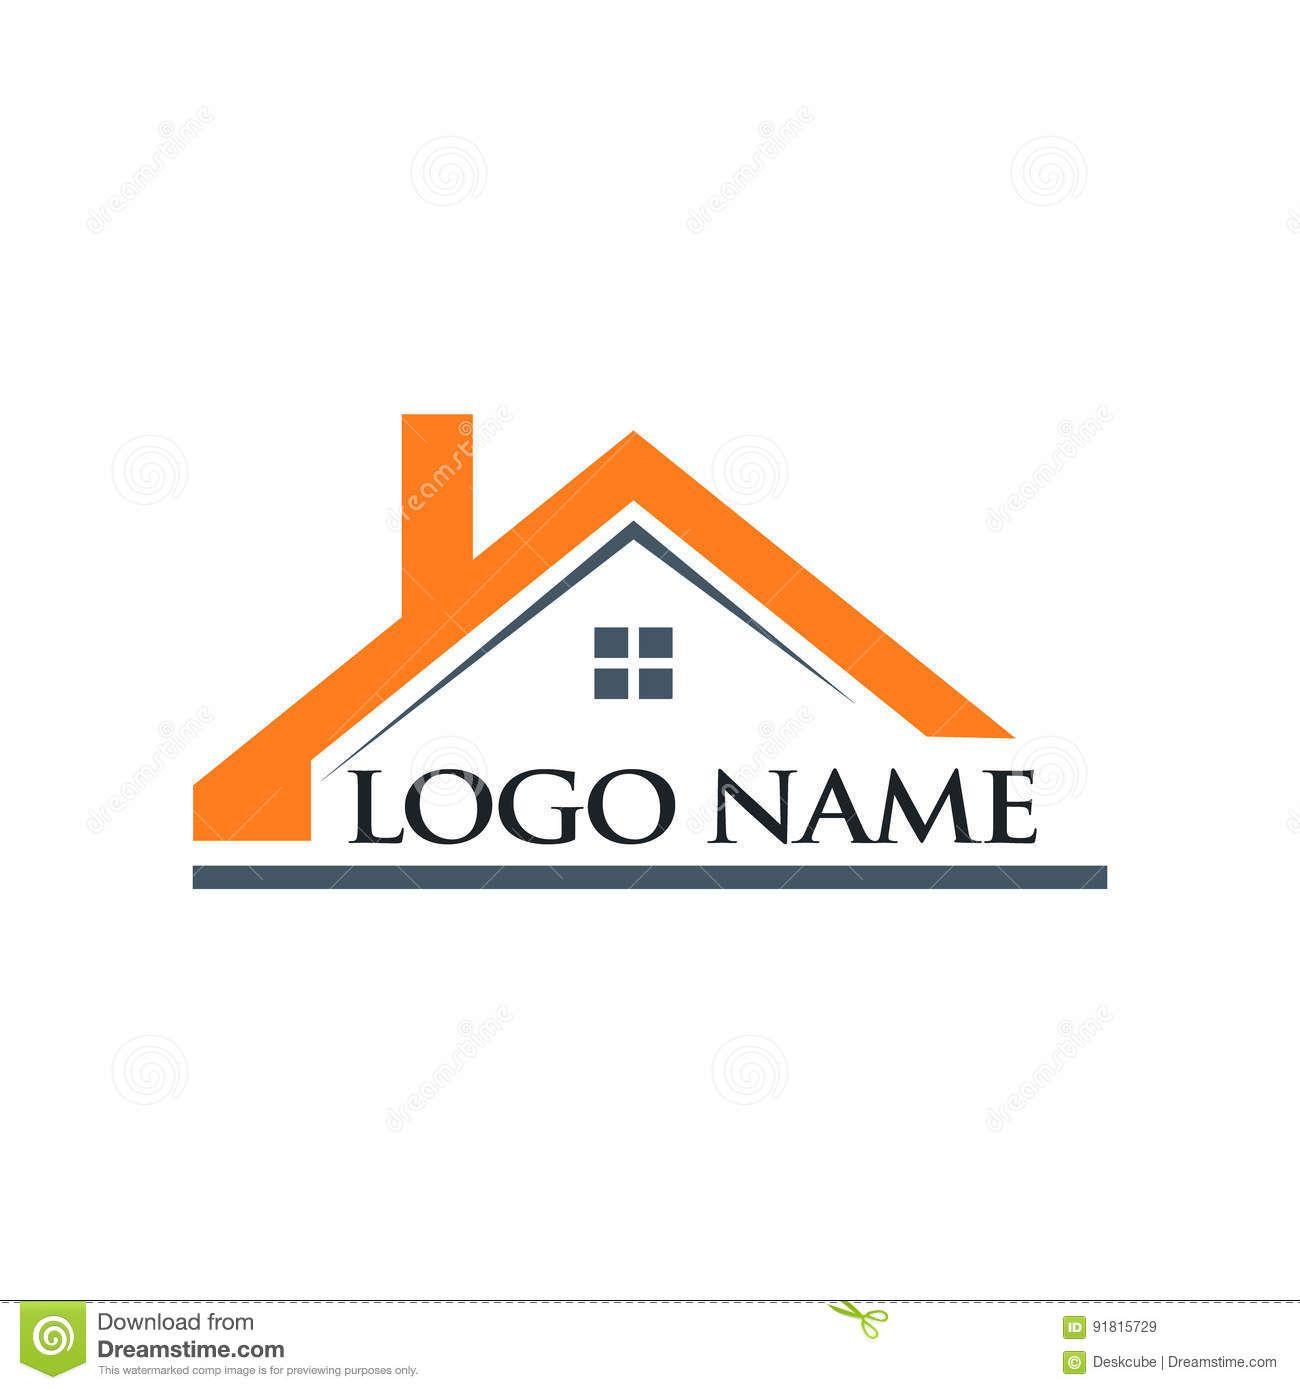 Roof Logo - Roof House and Logo Name Illustration | House Logo | House roof ...